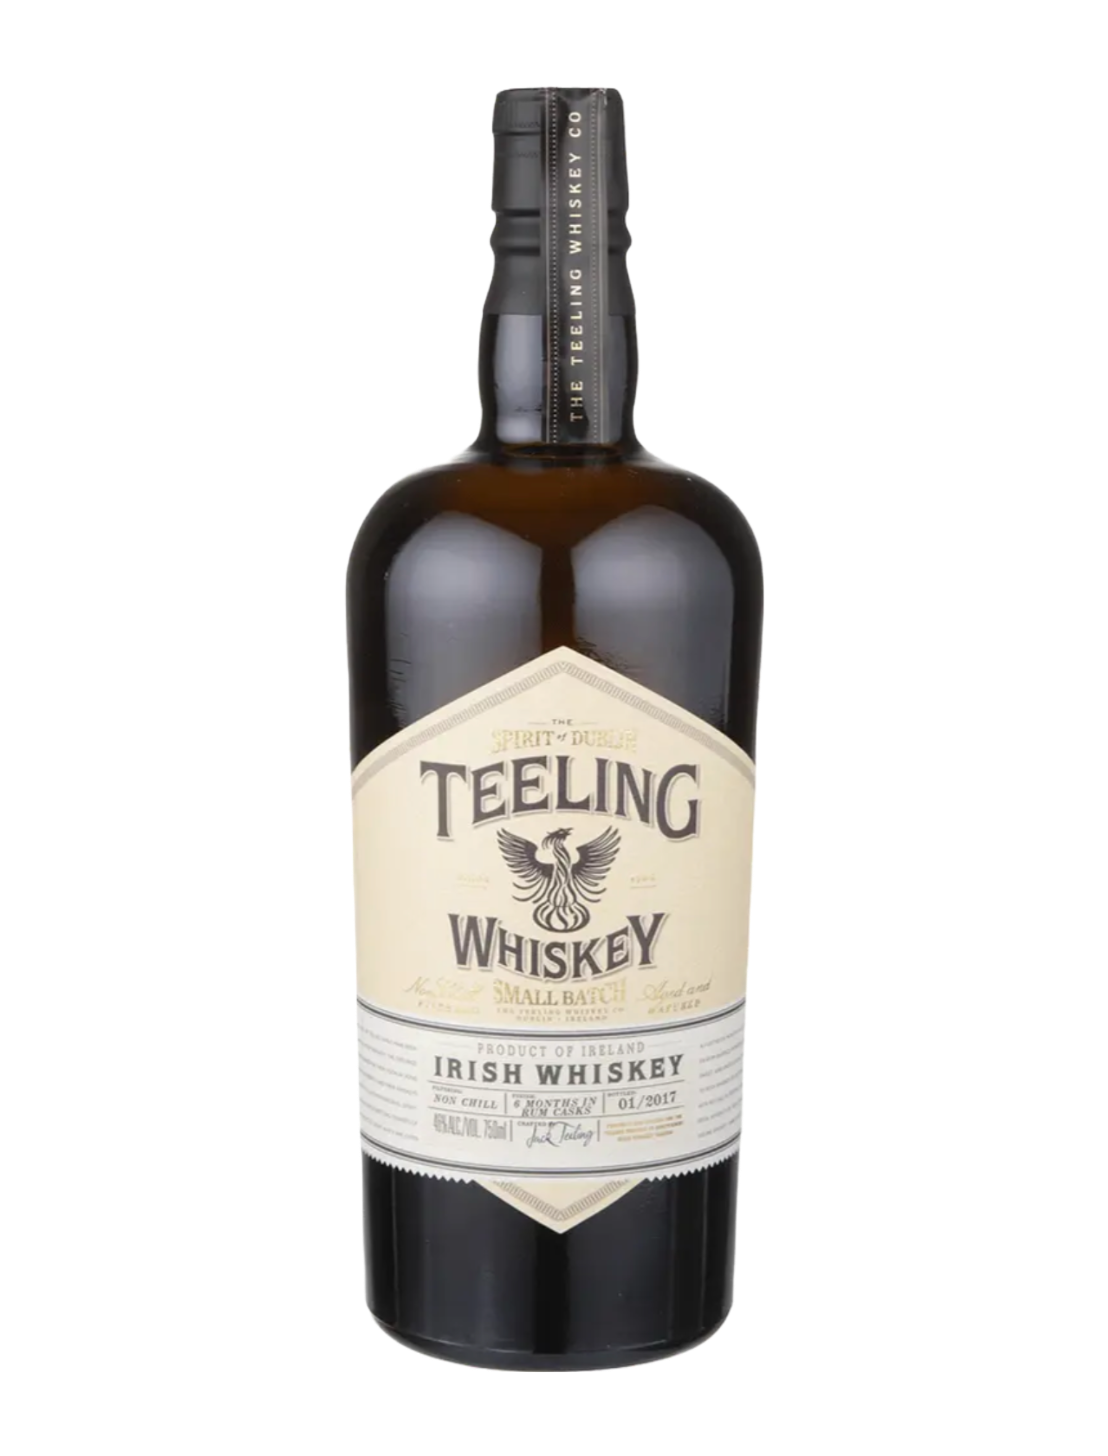 An elegant bottle of Teeling Small Batch Irish Whiskey in front of a plain white background